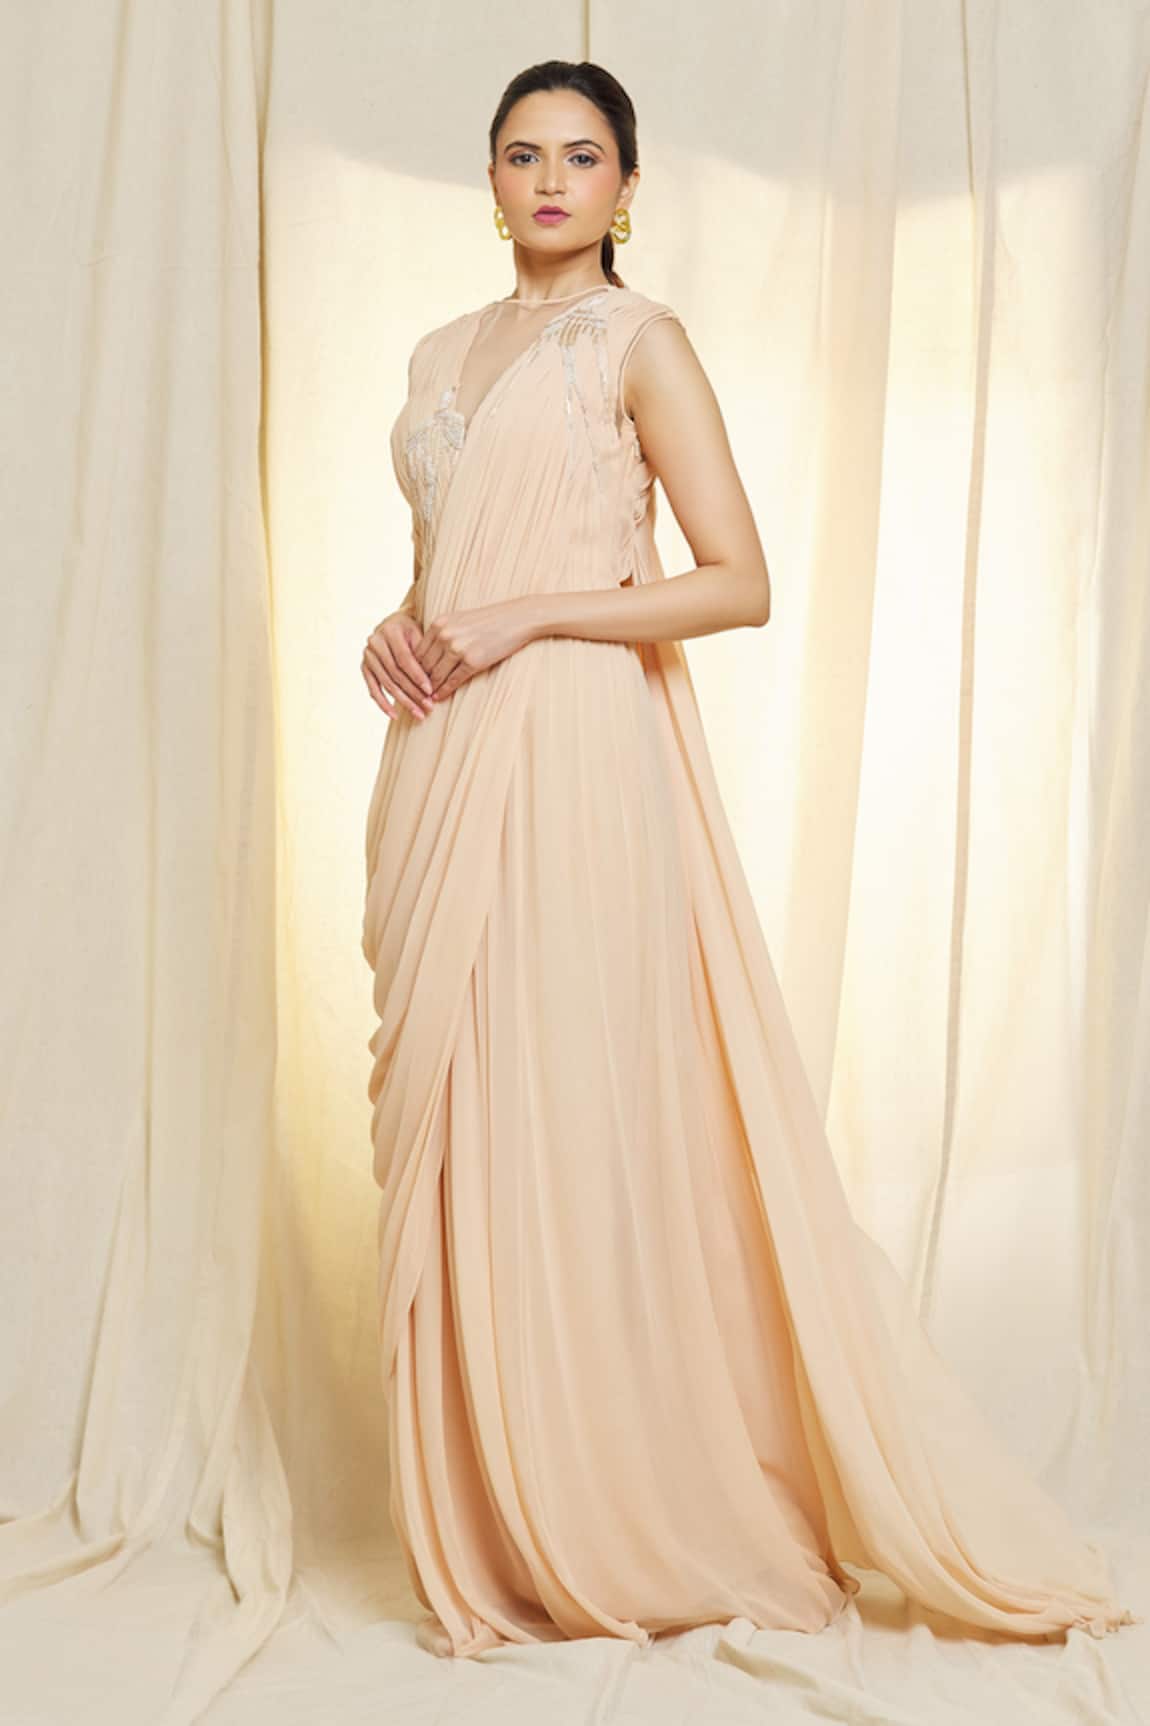 Vivek Patel Hand Embroidered Pre-Draped Saree Gown